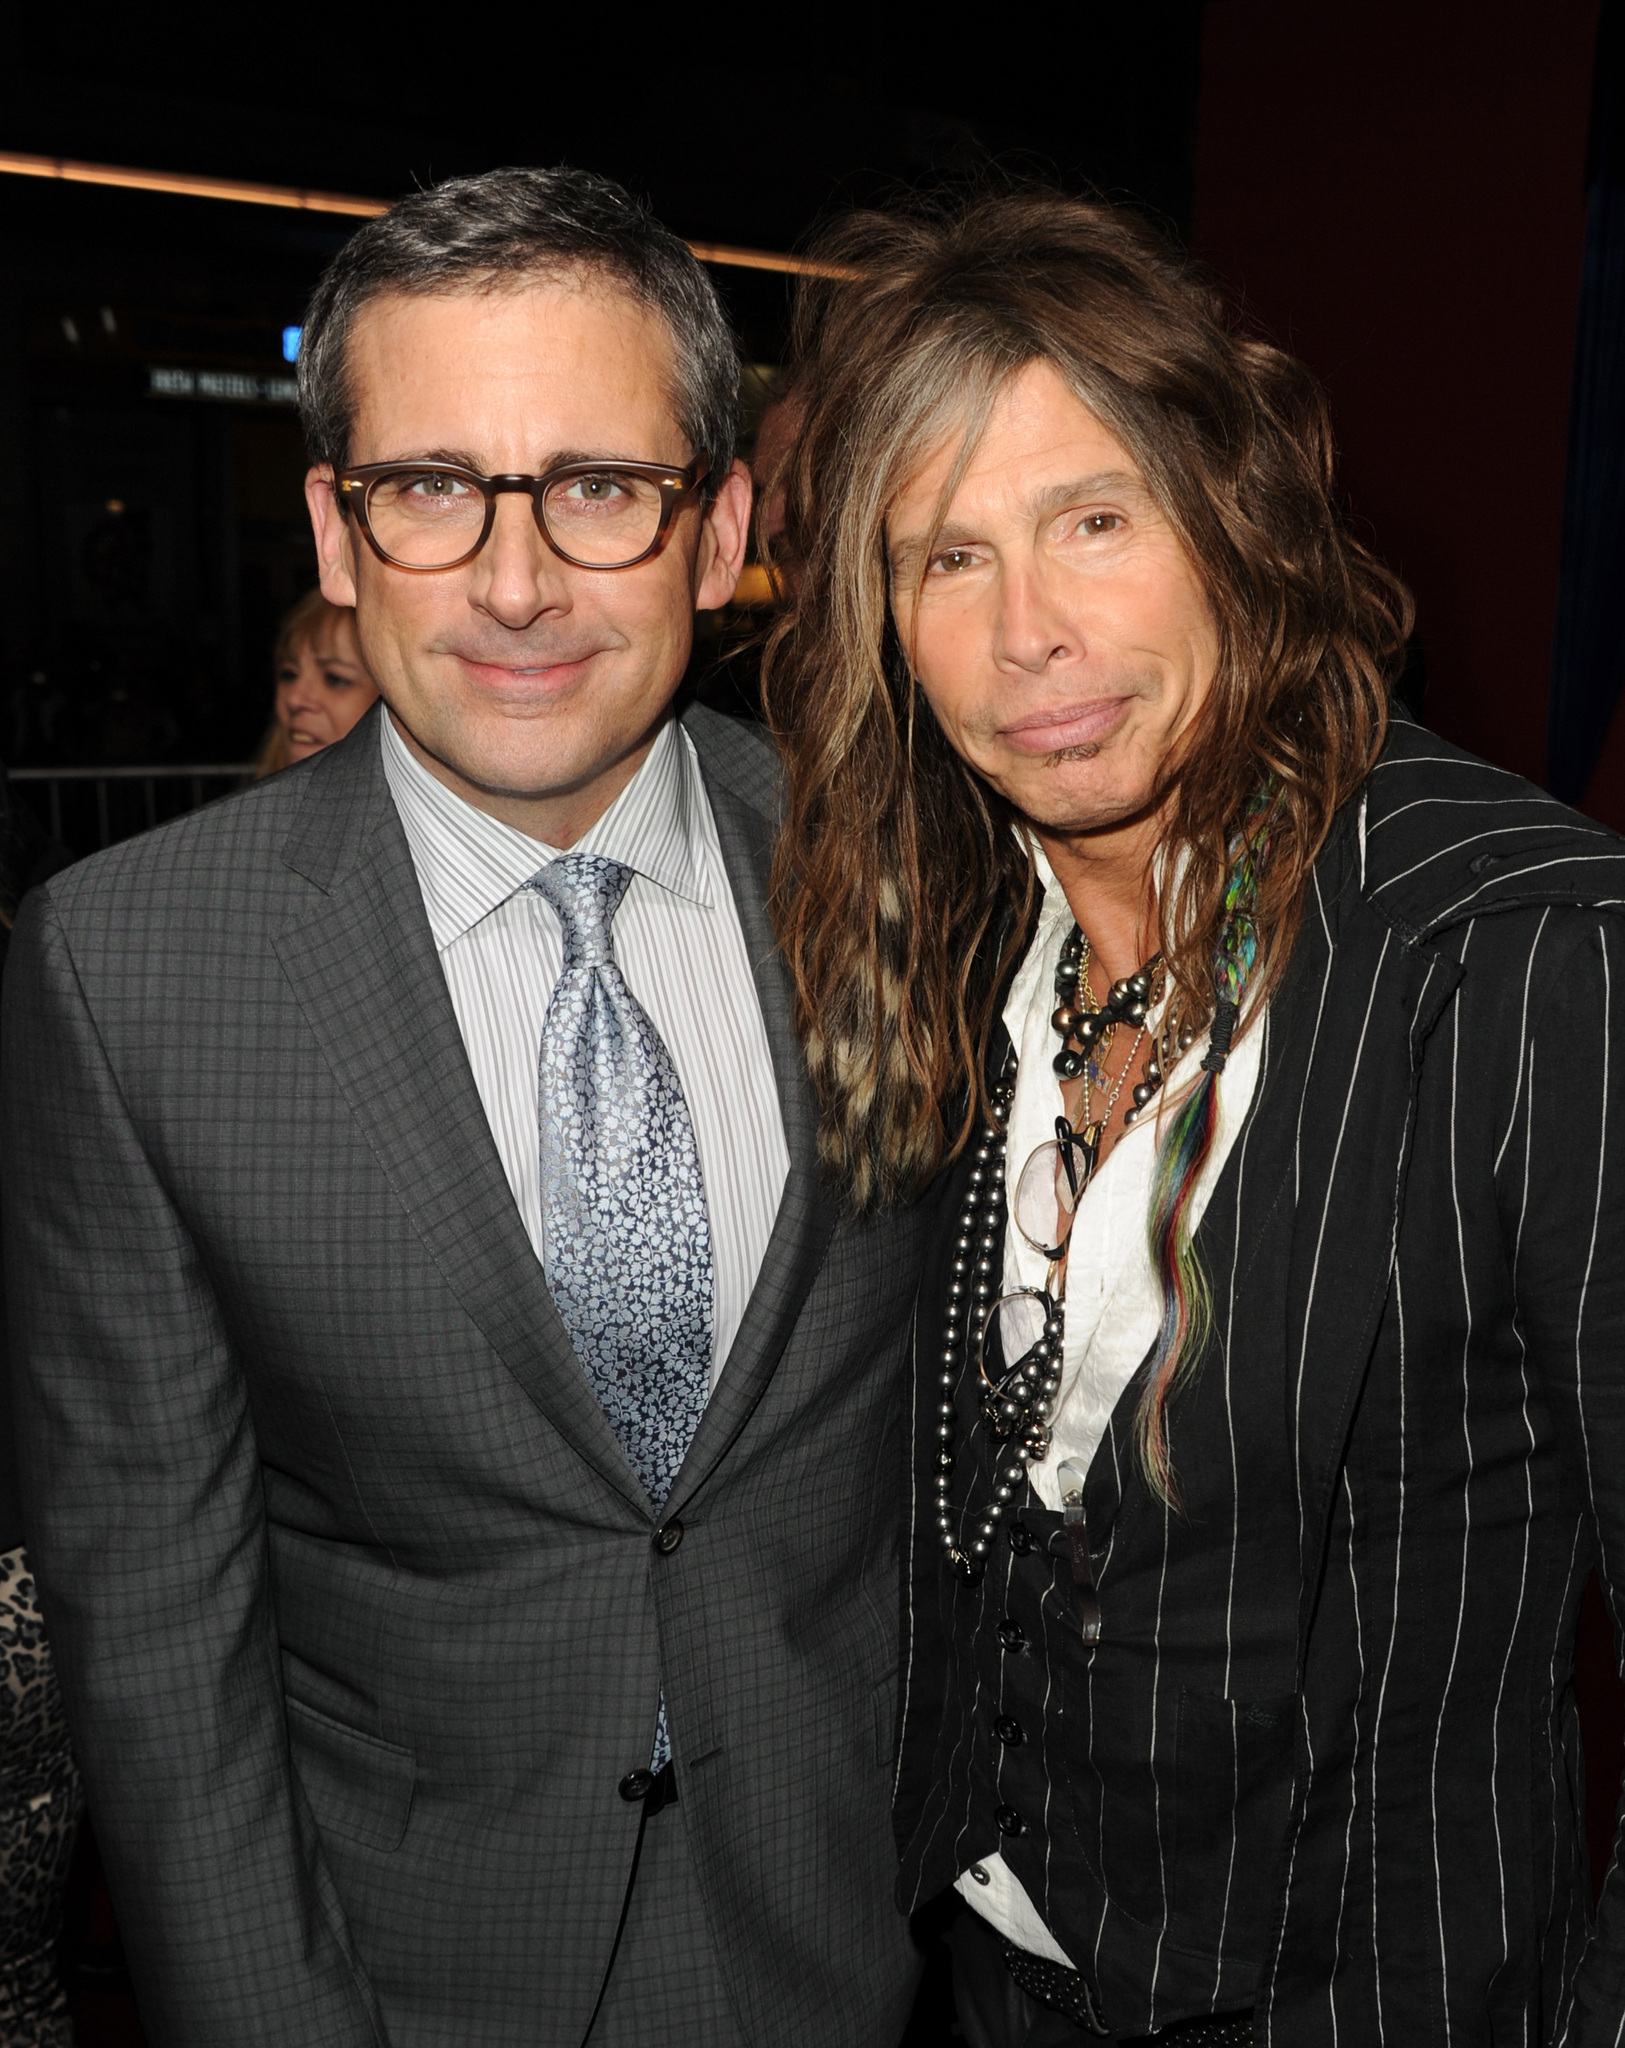 Steve Carell and Steven Tyler at event of The Incredible Burt Wonderstone (2013)